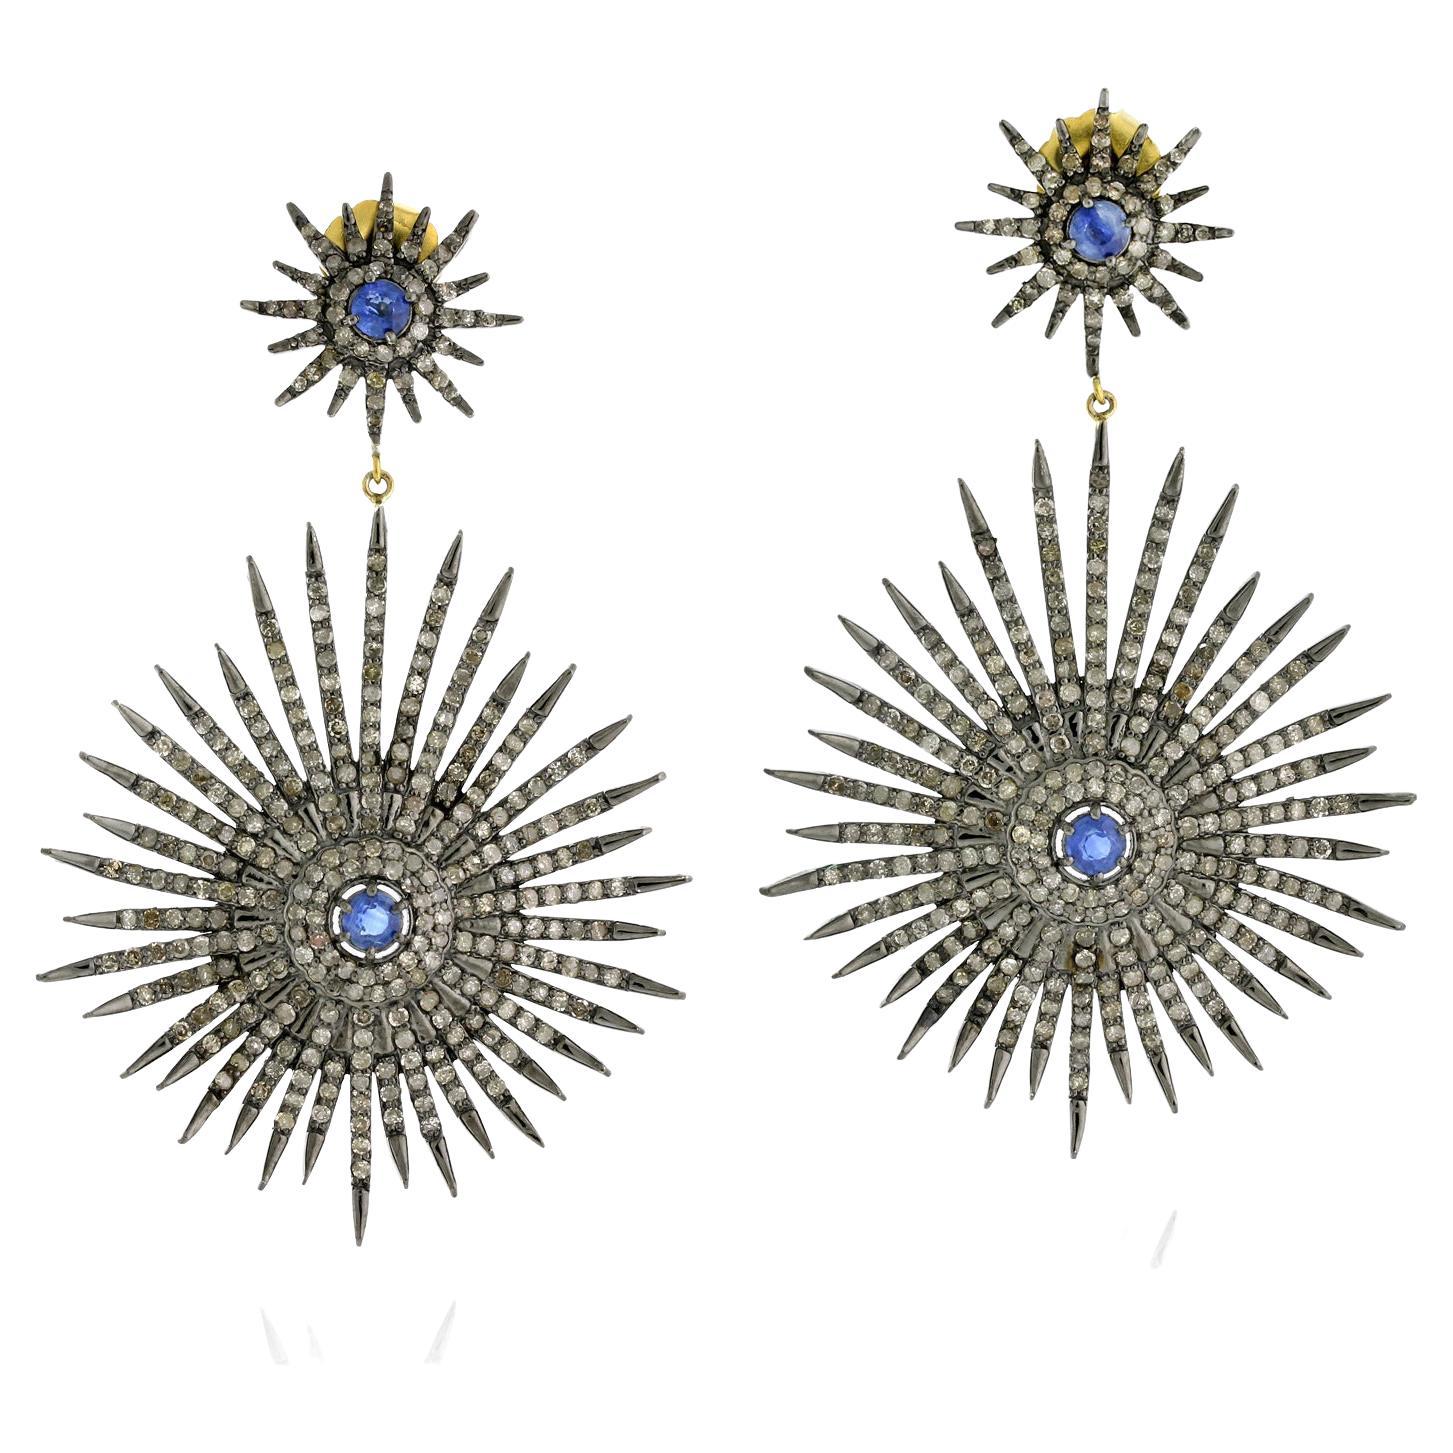 Starburst Earrings with Kyanite & Pave Diamonds Made in 14k Gold & Silver